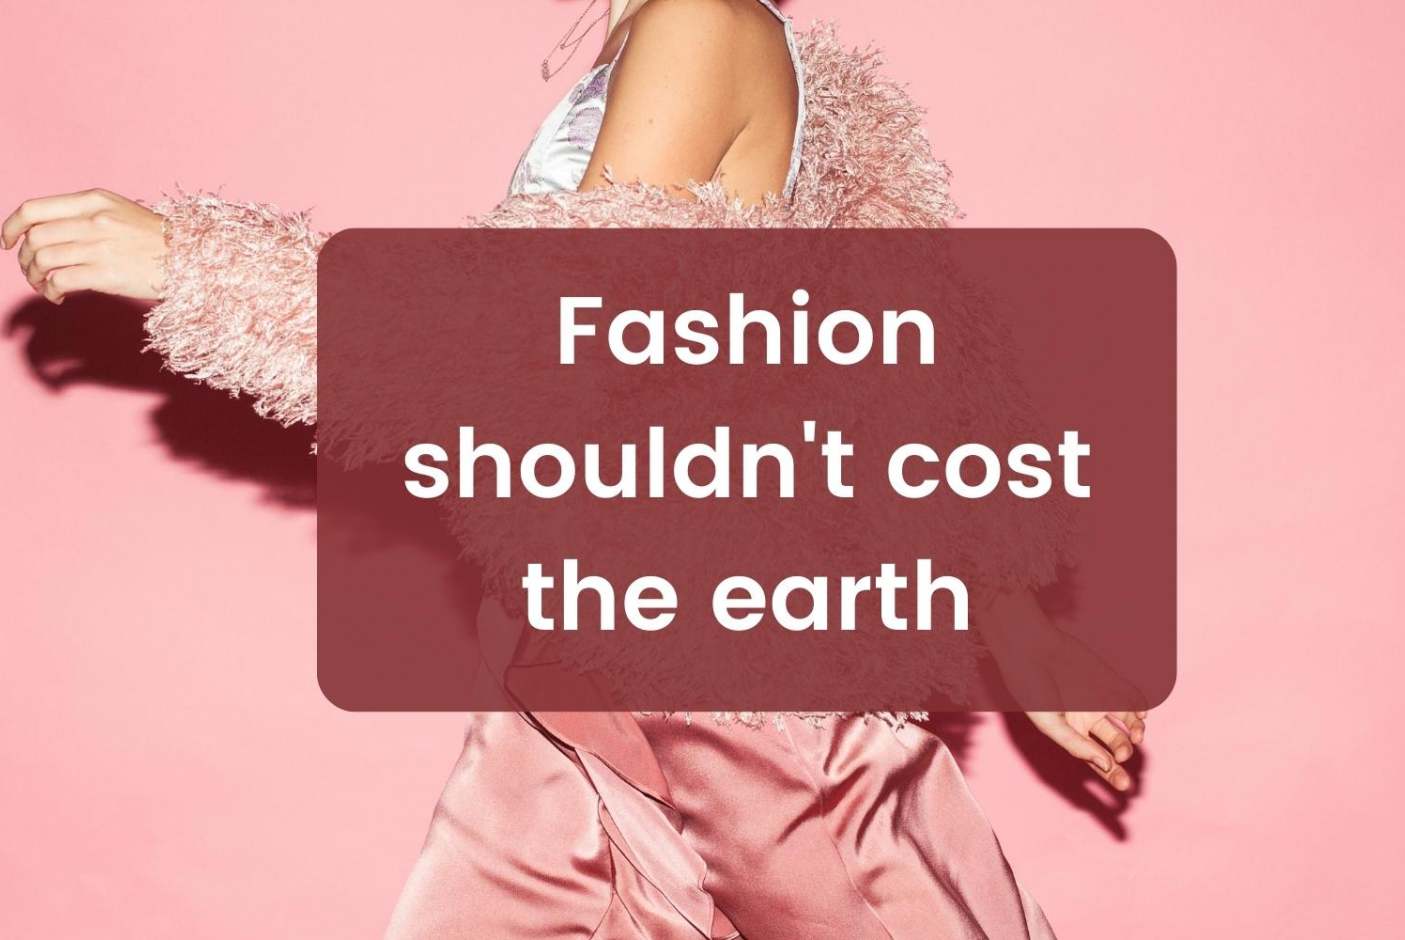 Target Sustainable Clothing Facts & Rating